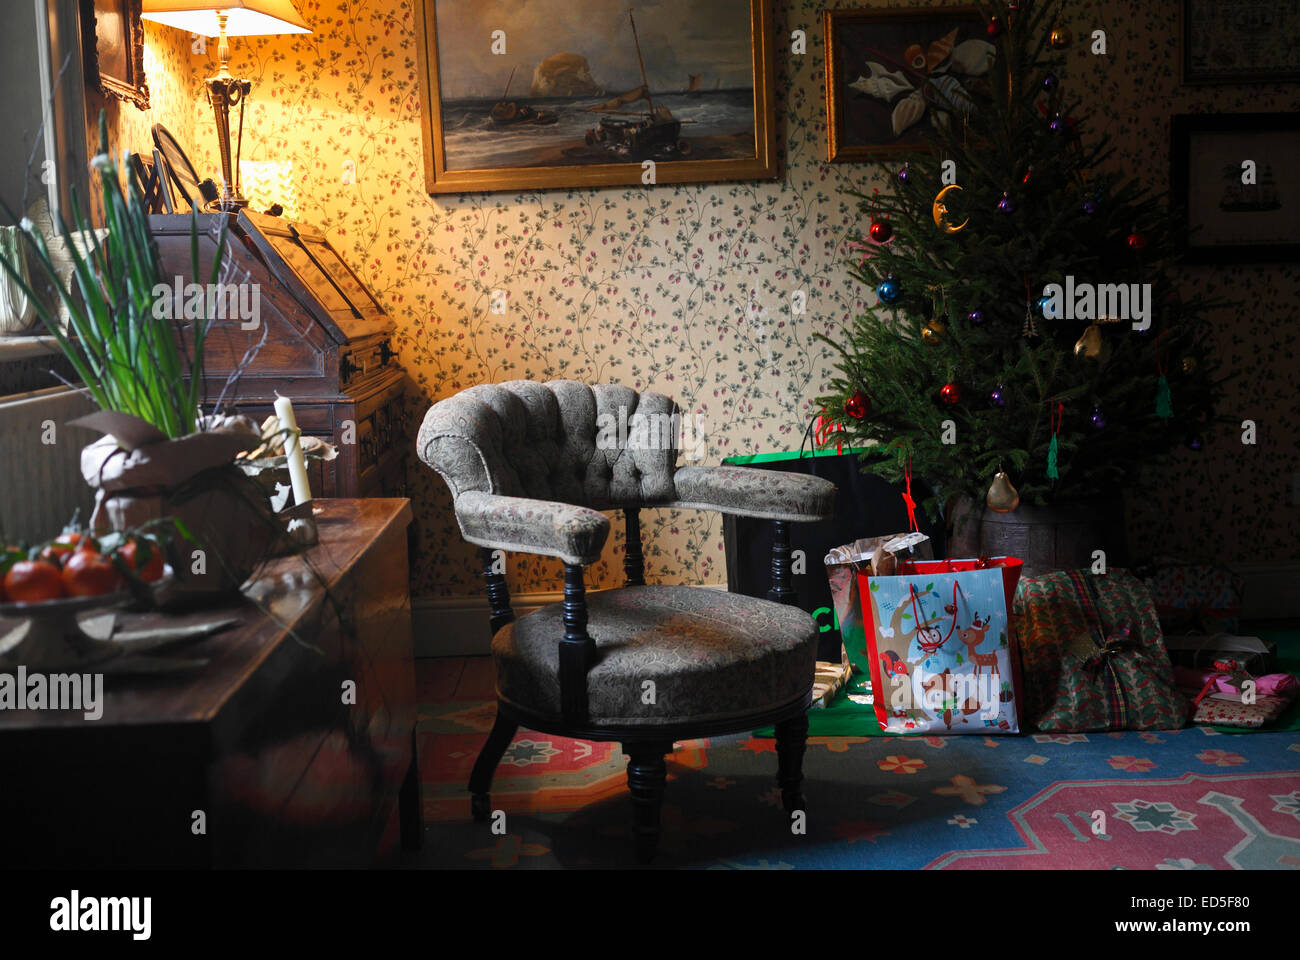 Drawing room interior at Chistmas time with a vacant chair. Stock Photo